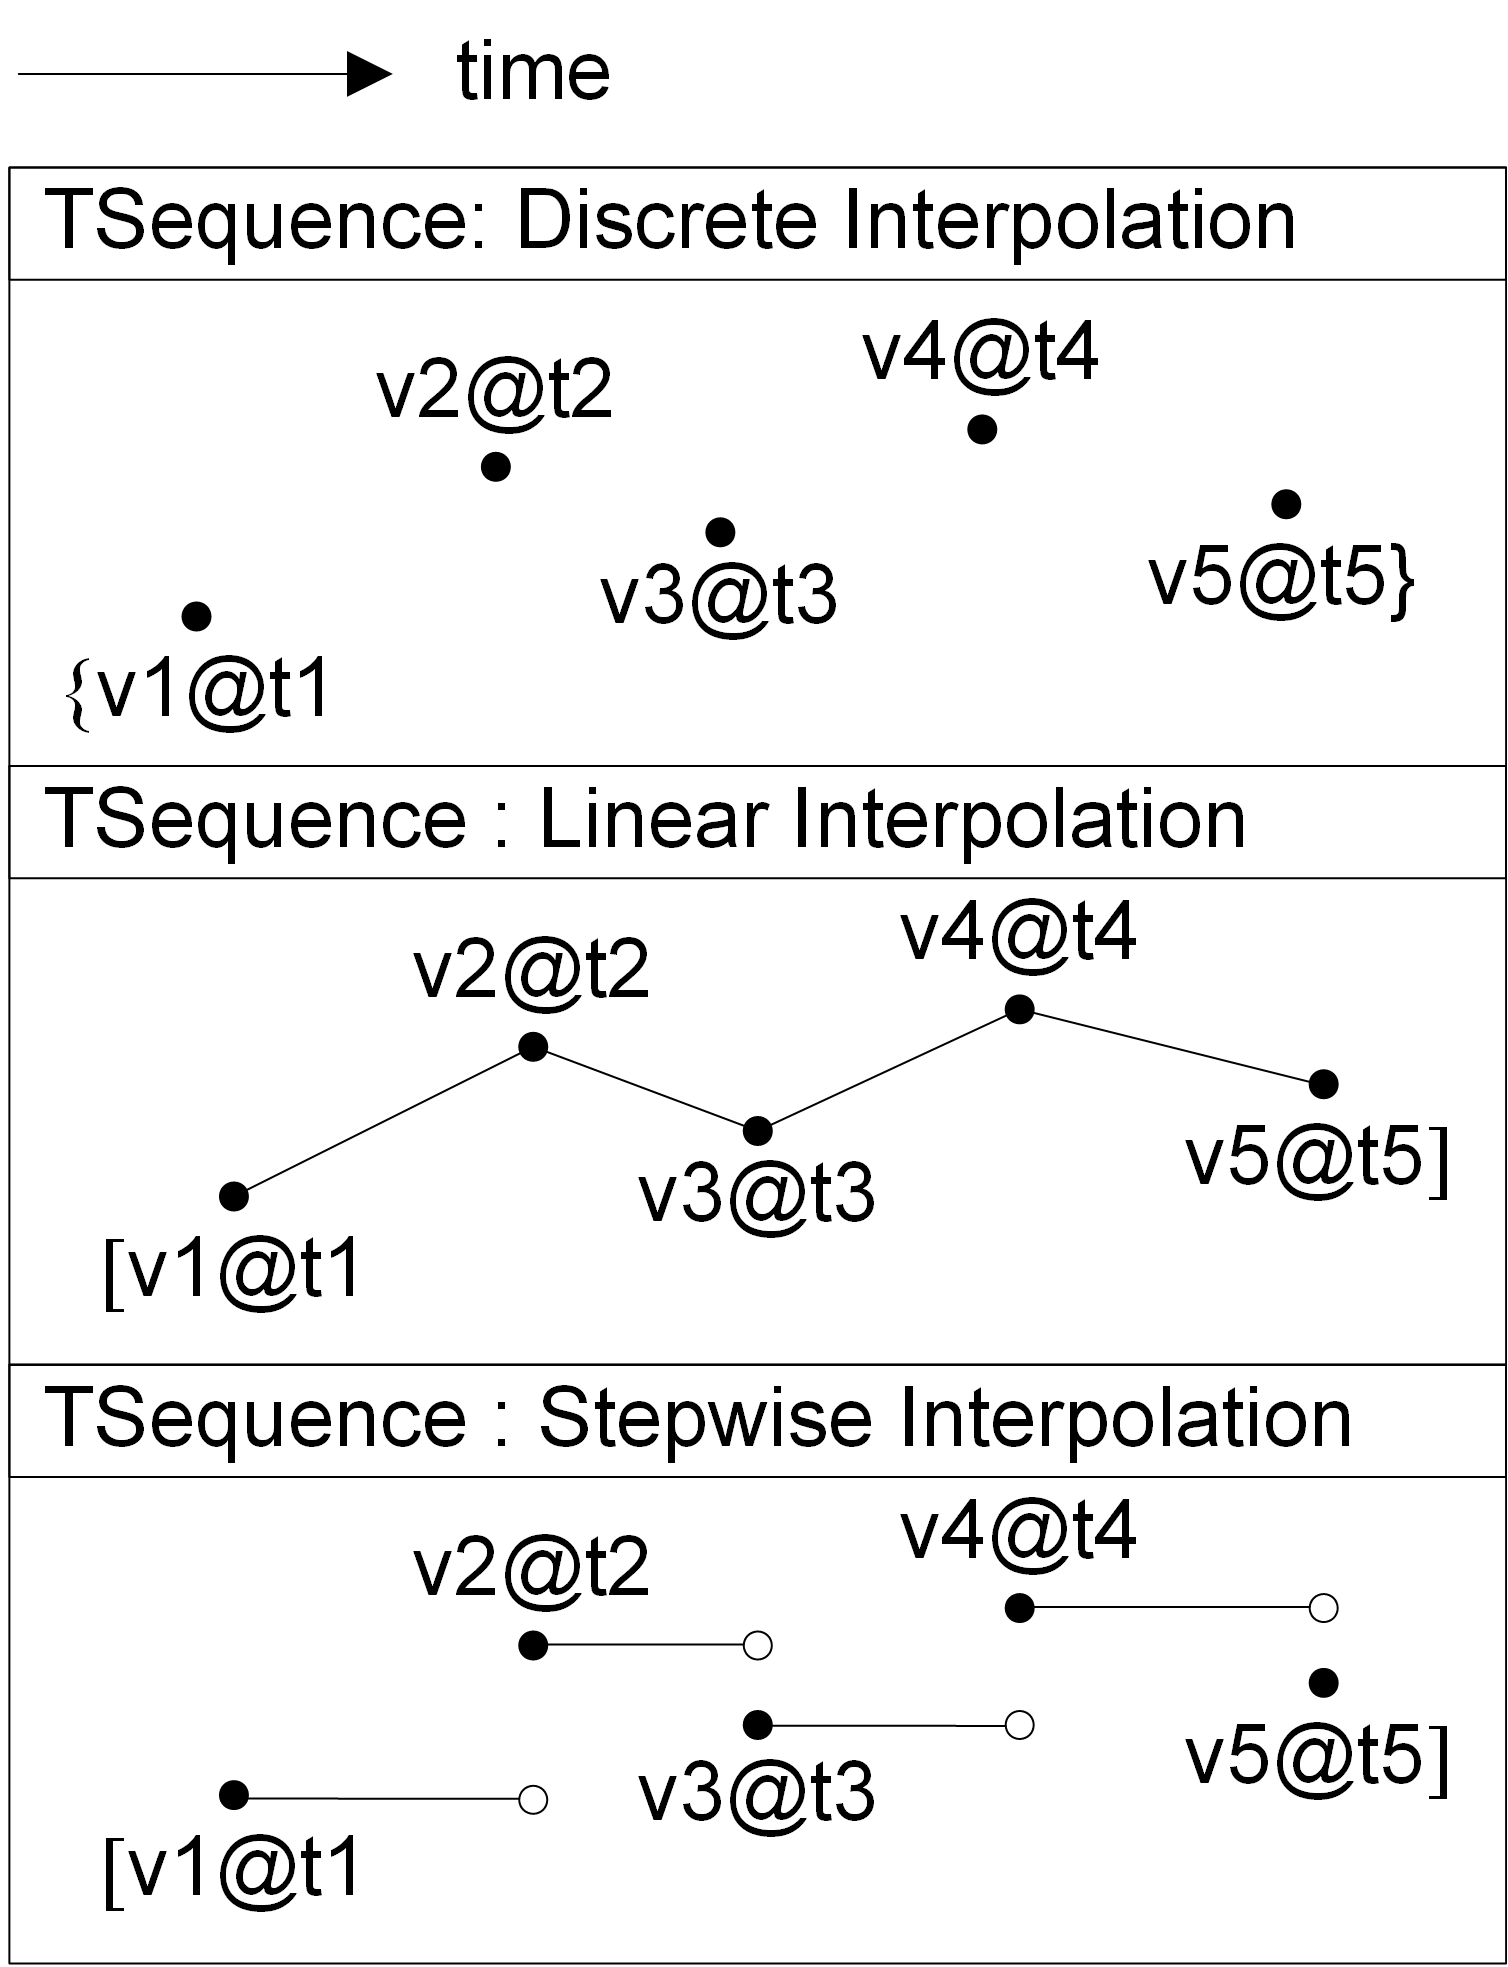 Temporal sequence values